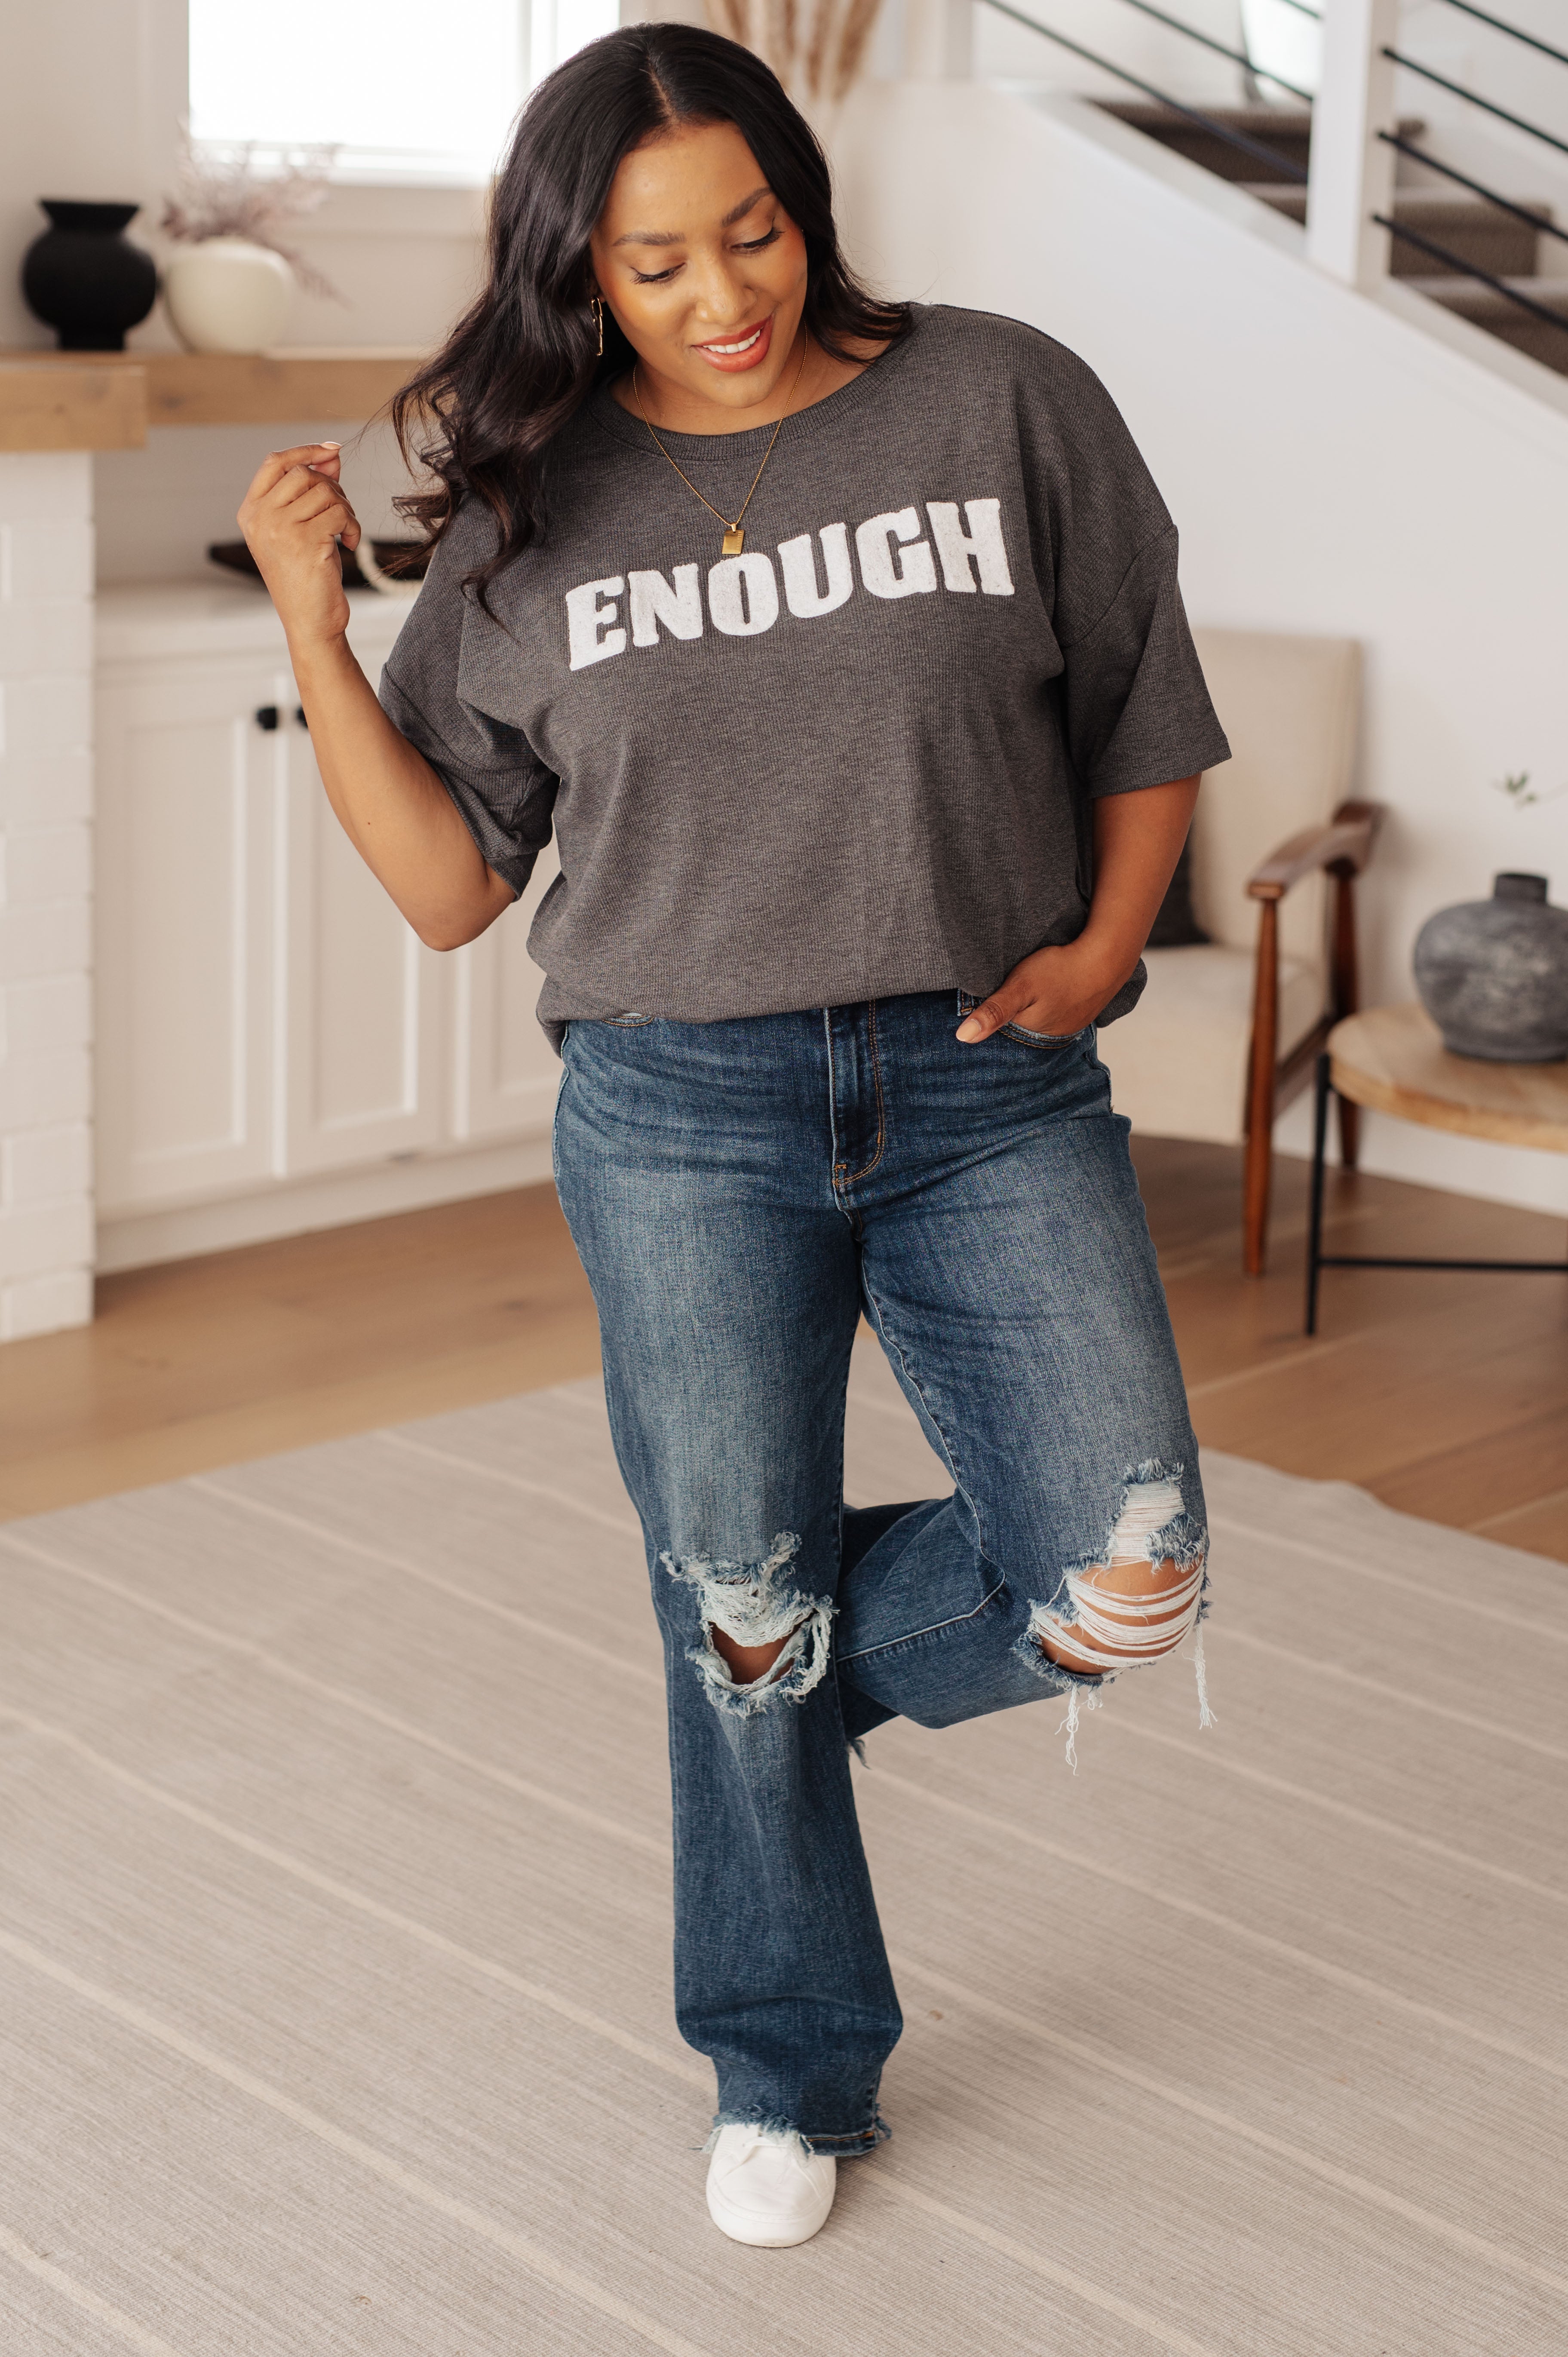 Always Enough Graphic Tee in Charcoal Ave Shops